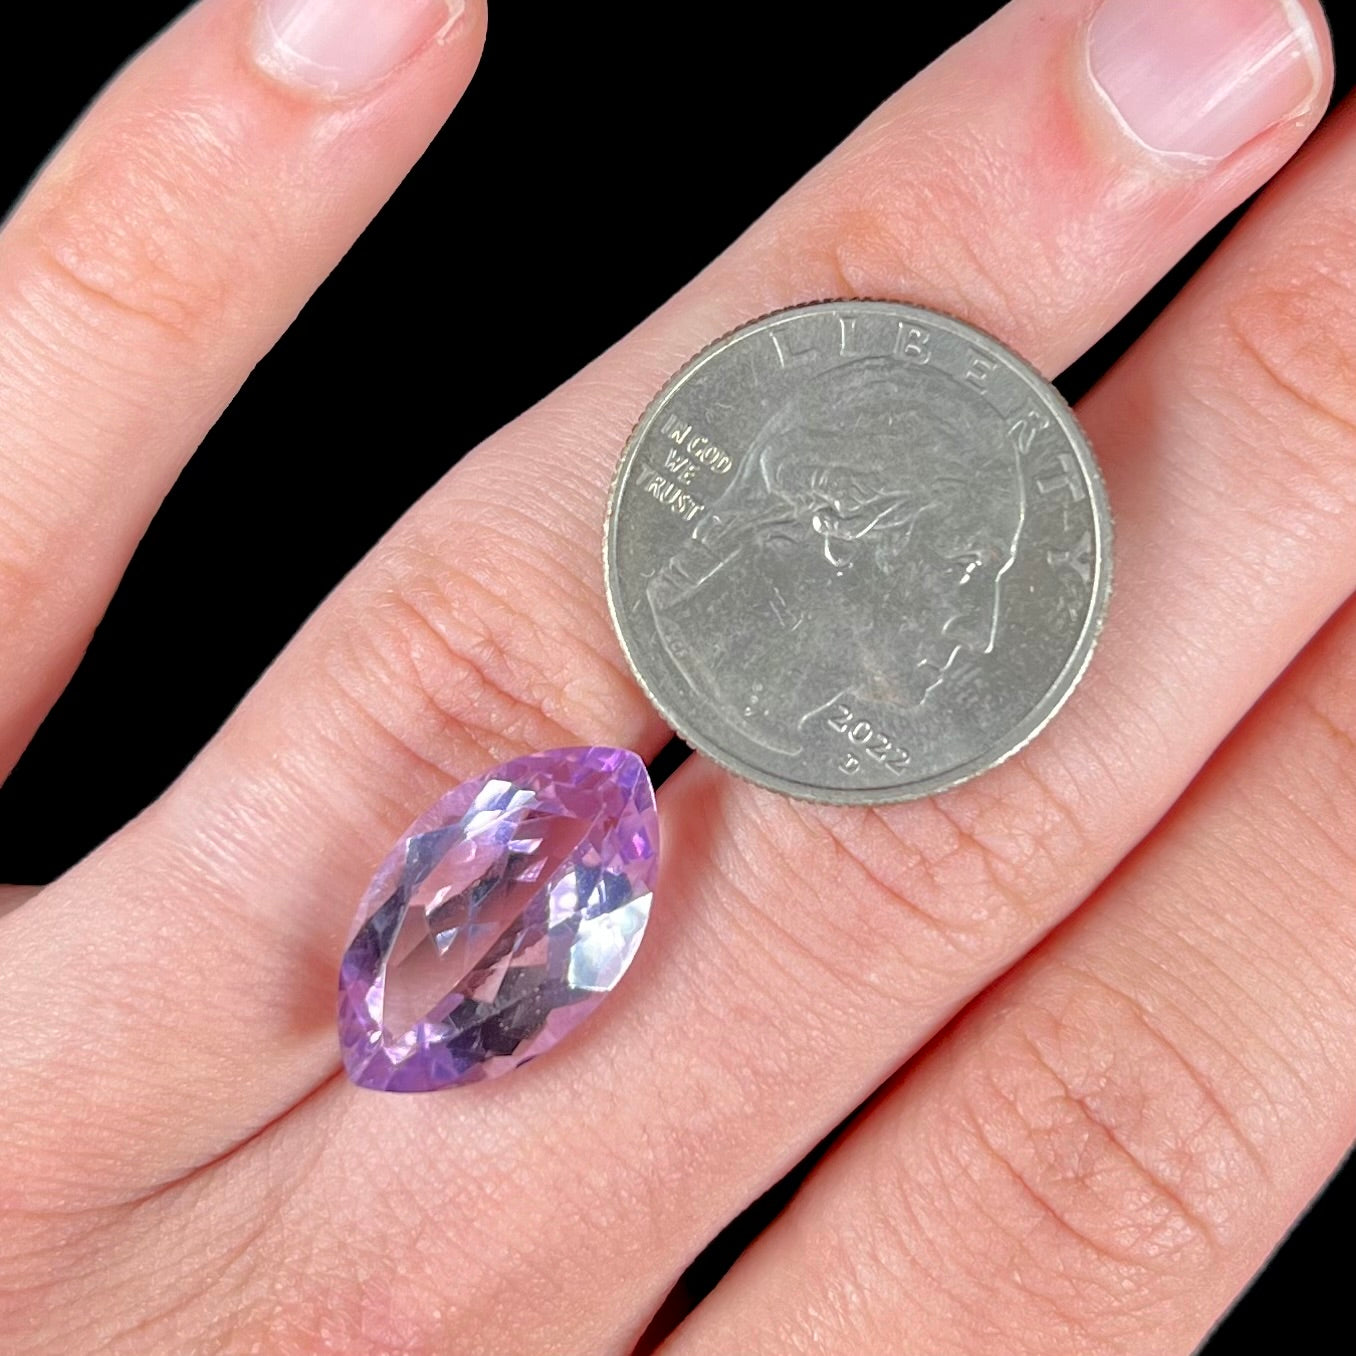 A loose marquise cut amethyst gemstone.  The stone is a light purple color and has scratches along the surface.